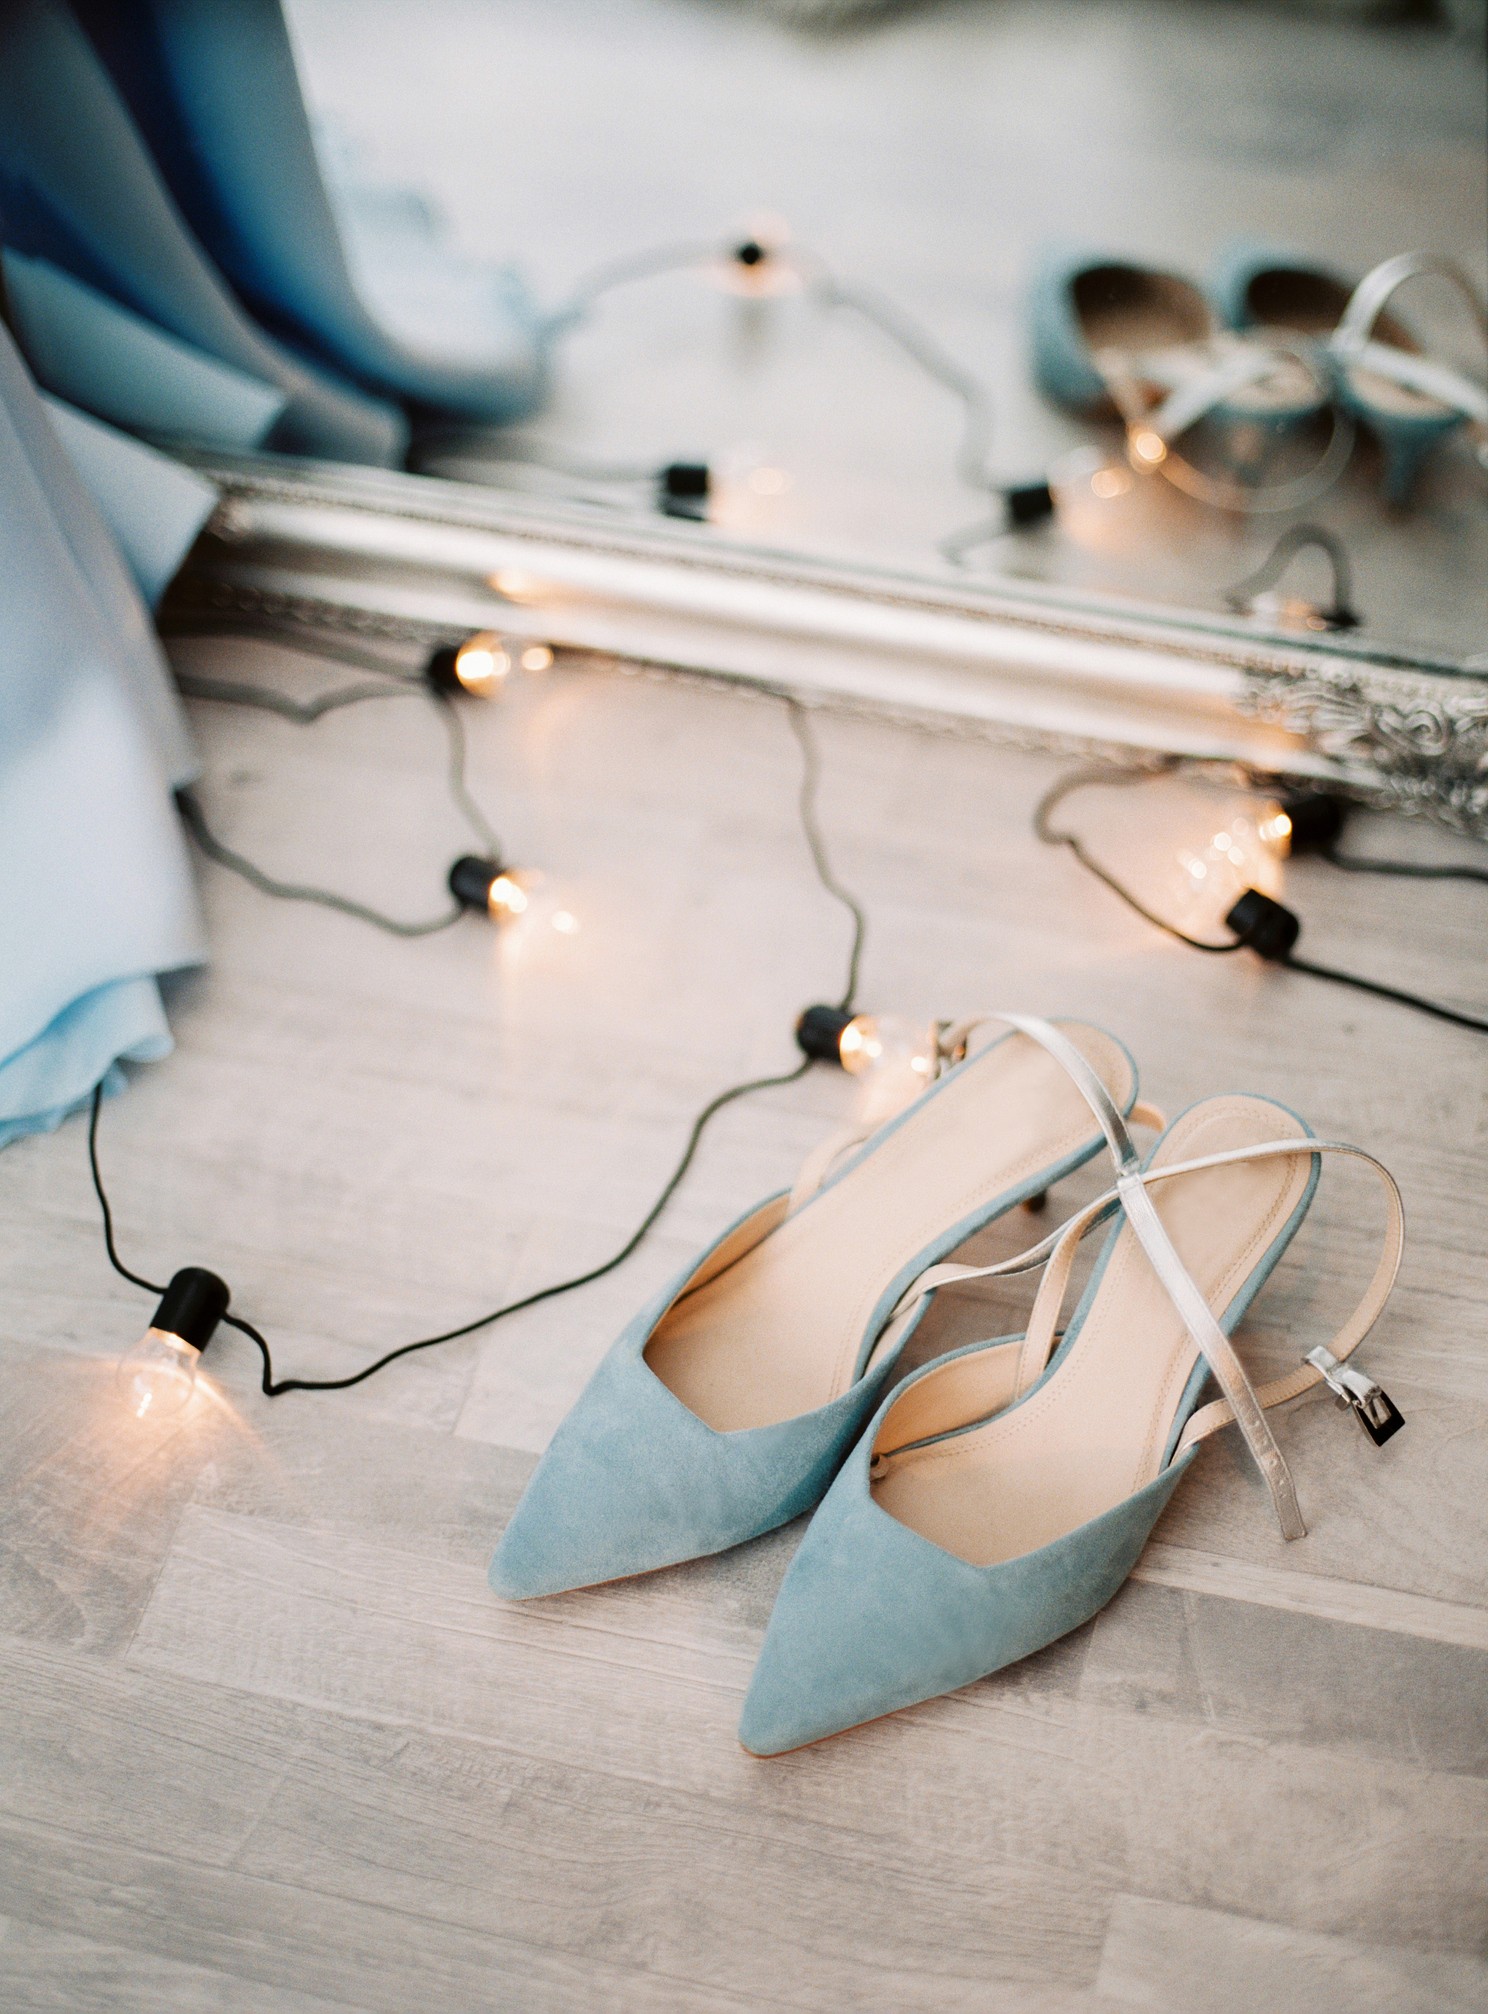 Blue suede high heel summer female shoes and lamps garland on a floor, with mirror background, contemporary fashion. Top view, flat lay, closeup. (Foto: Getty Images/iStockphoto)